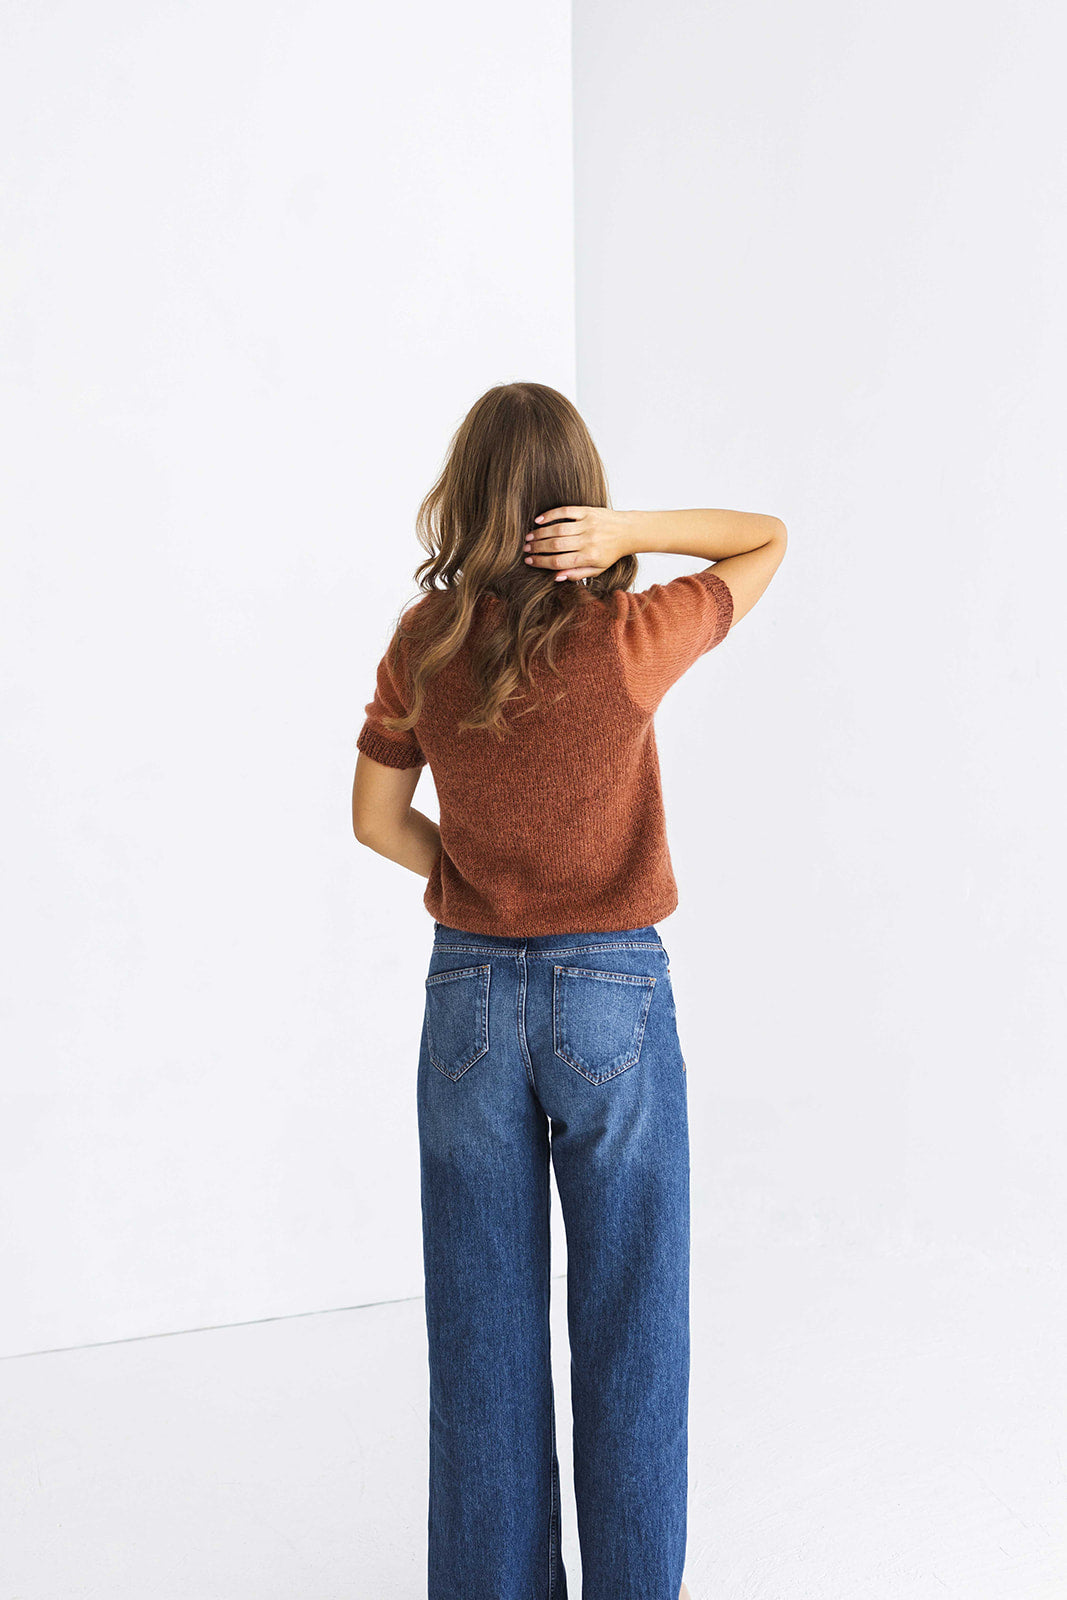 Rust Minimal Mohair Knit Top, Ginger Brown Knitted Summer T-shirt, Burned Orange Short Sleeve Blouse For Women, Knitted Sweater Pullover